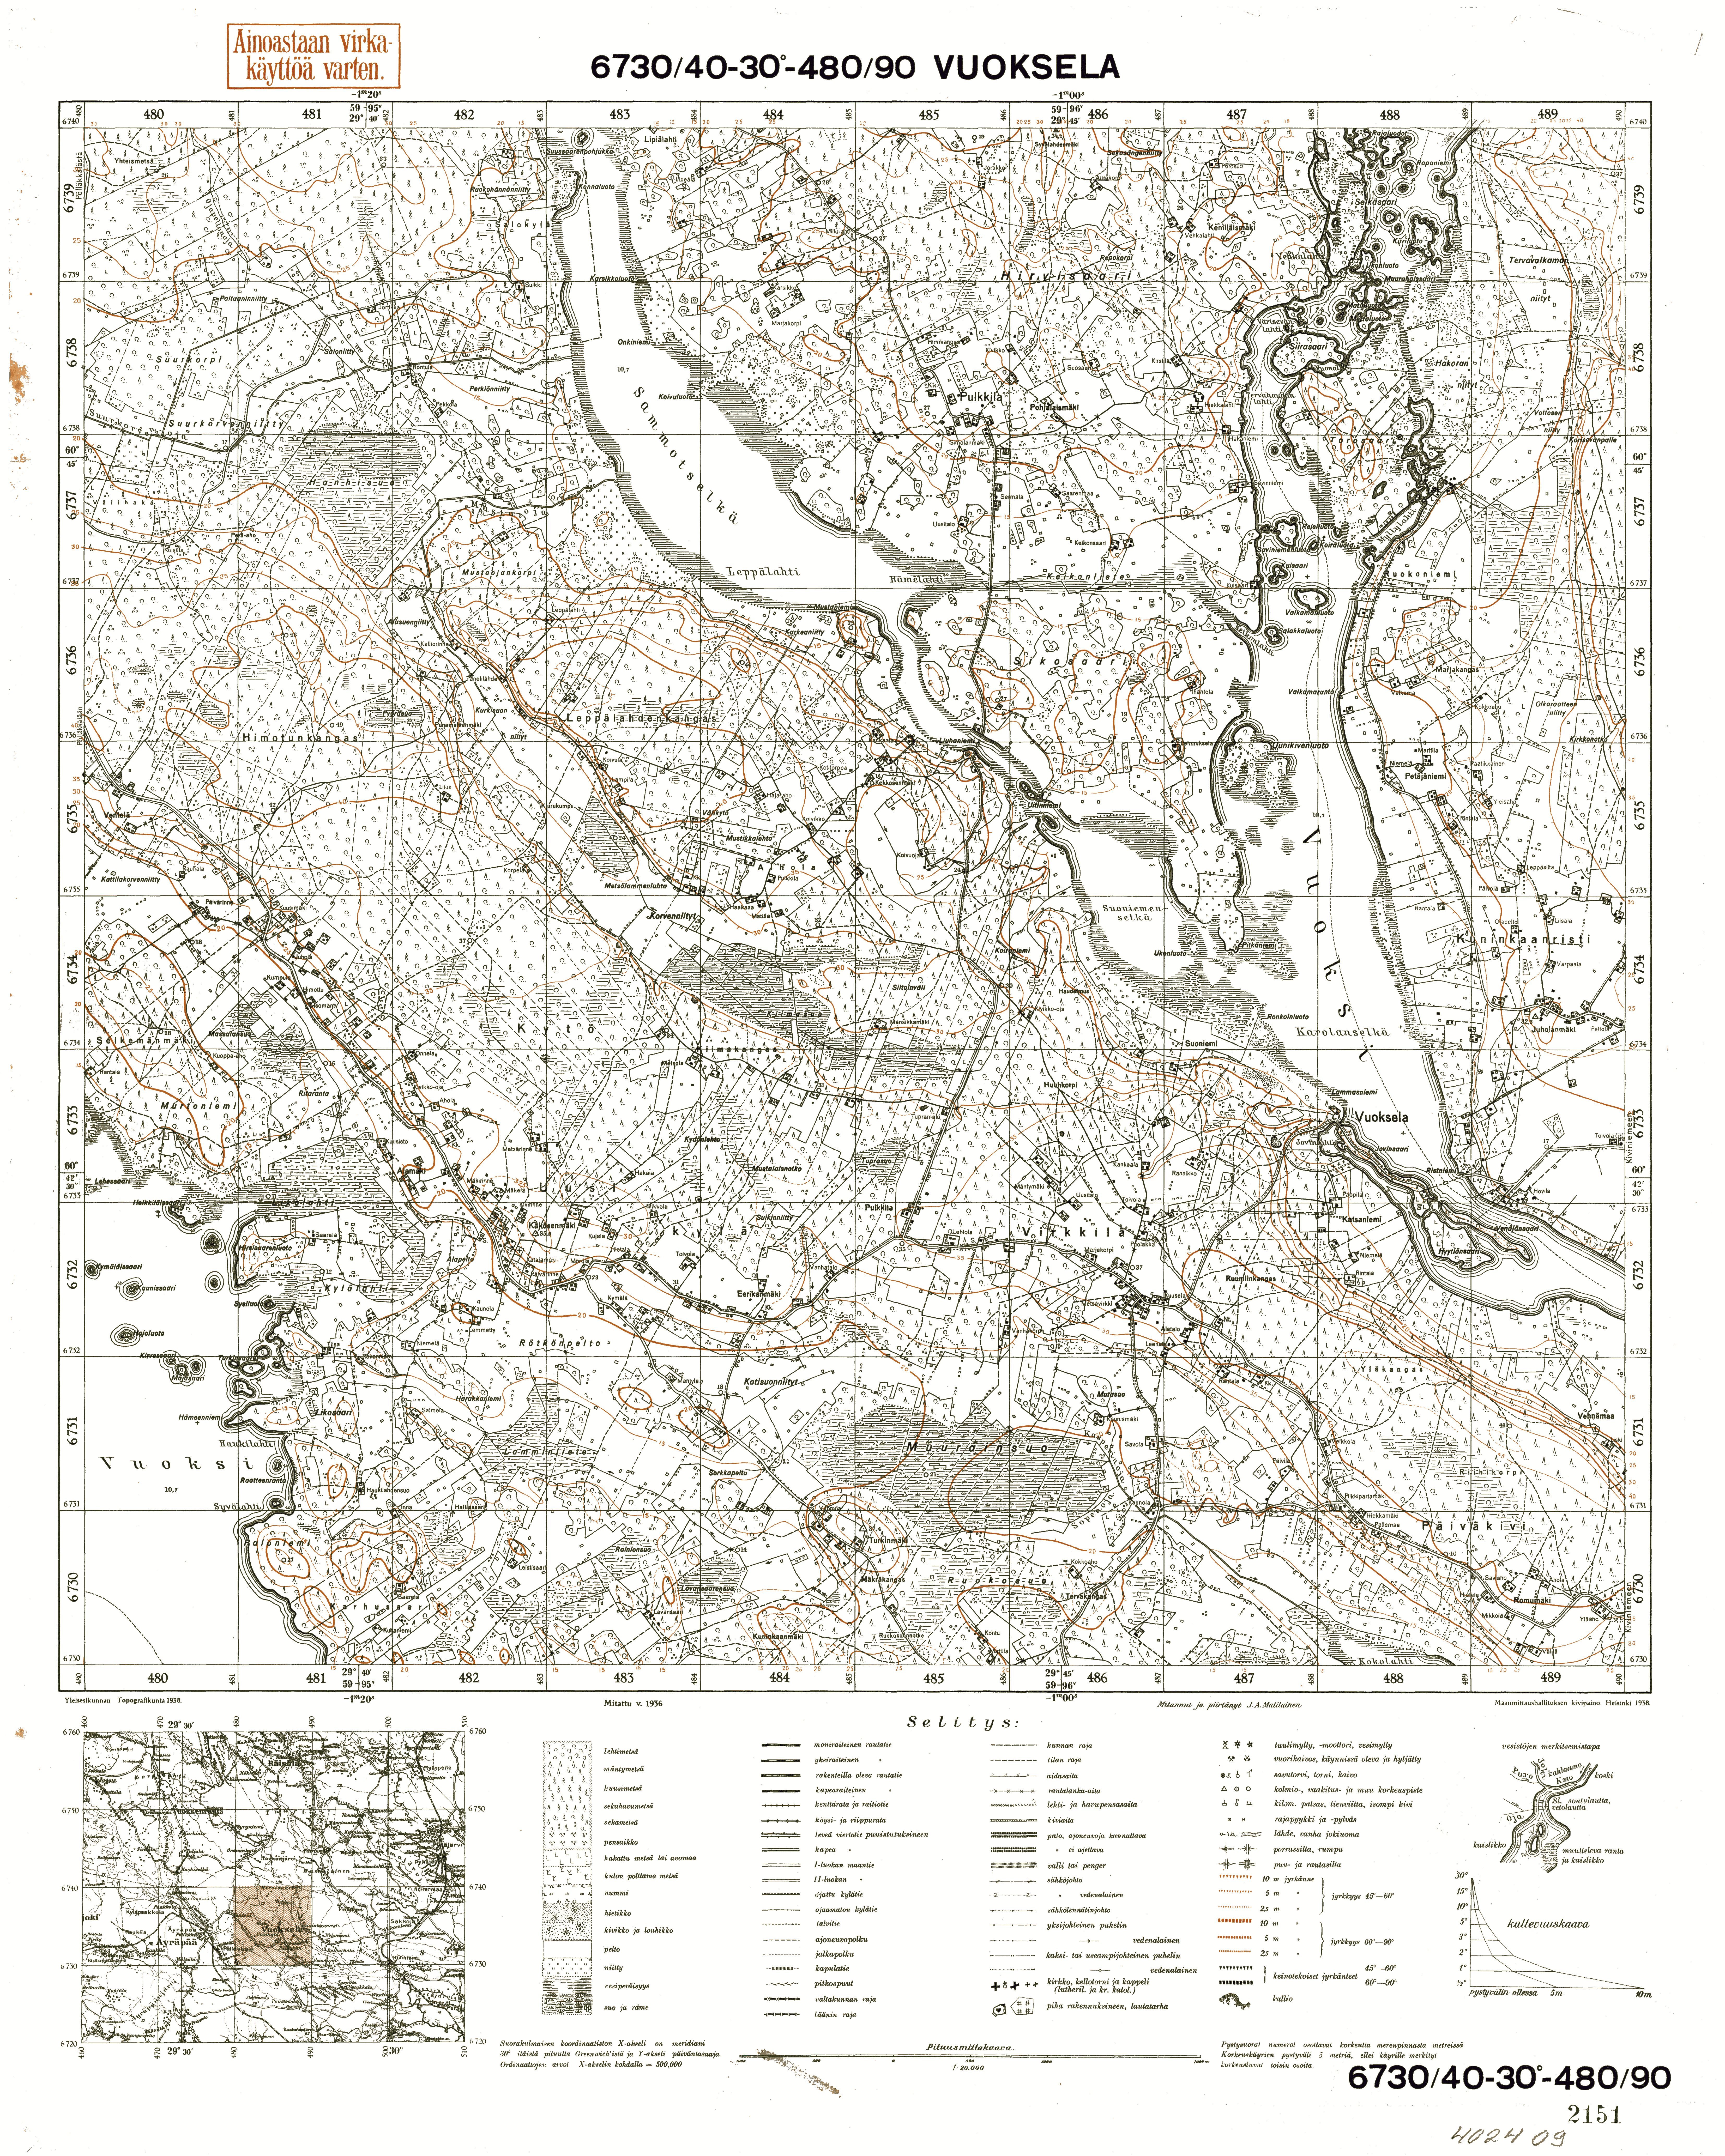 Romaški. Vuoksela. Topografikartta 402409. Topographic map from 1935. Use the zooming tool to explore in higher level of detail. Obtain as a quality print or high resolution image